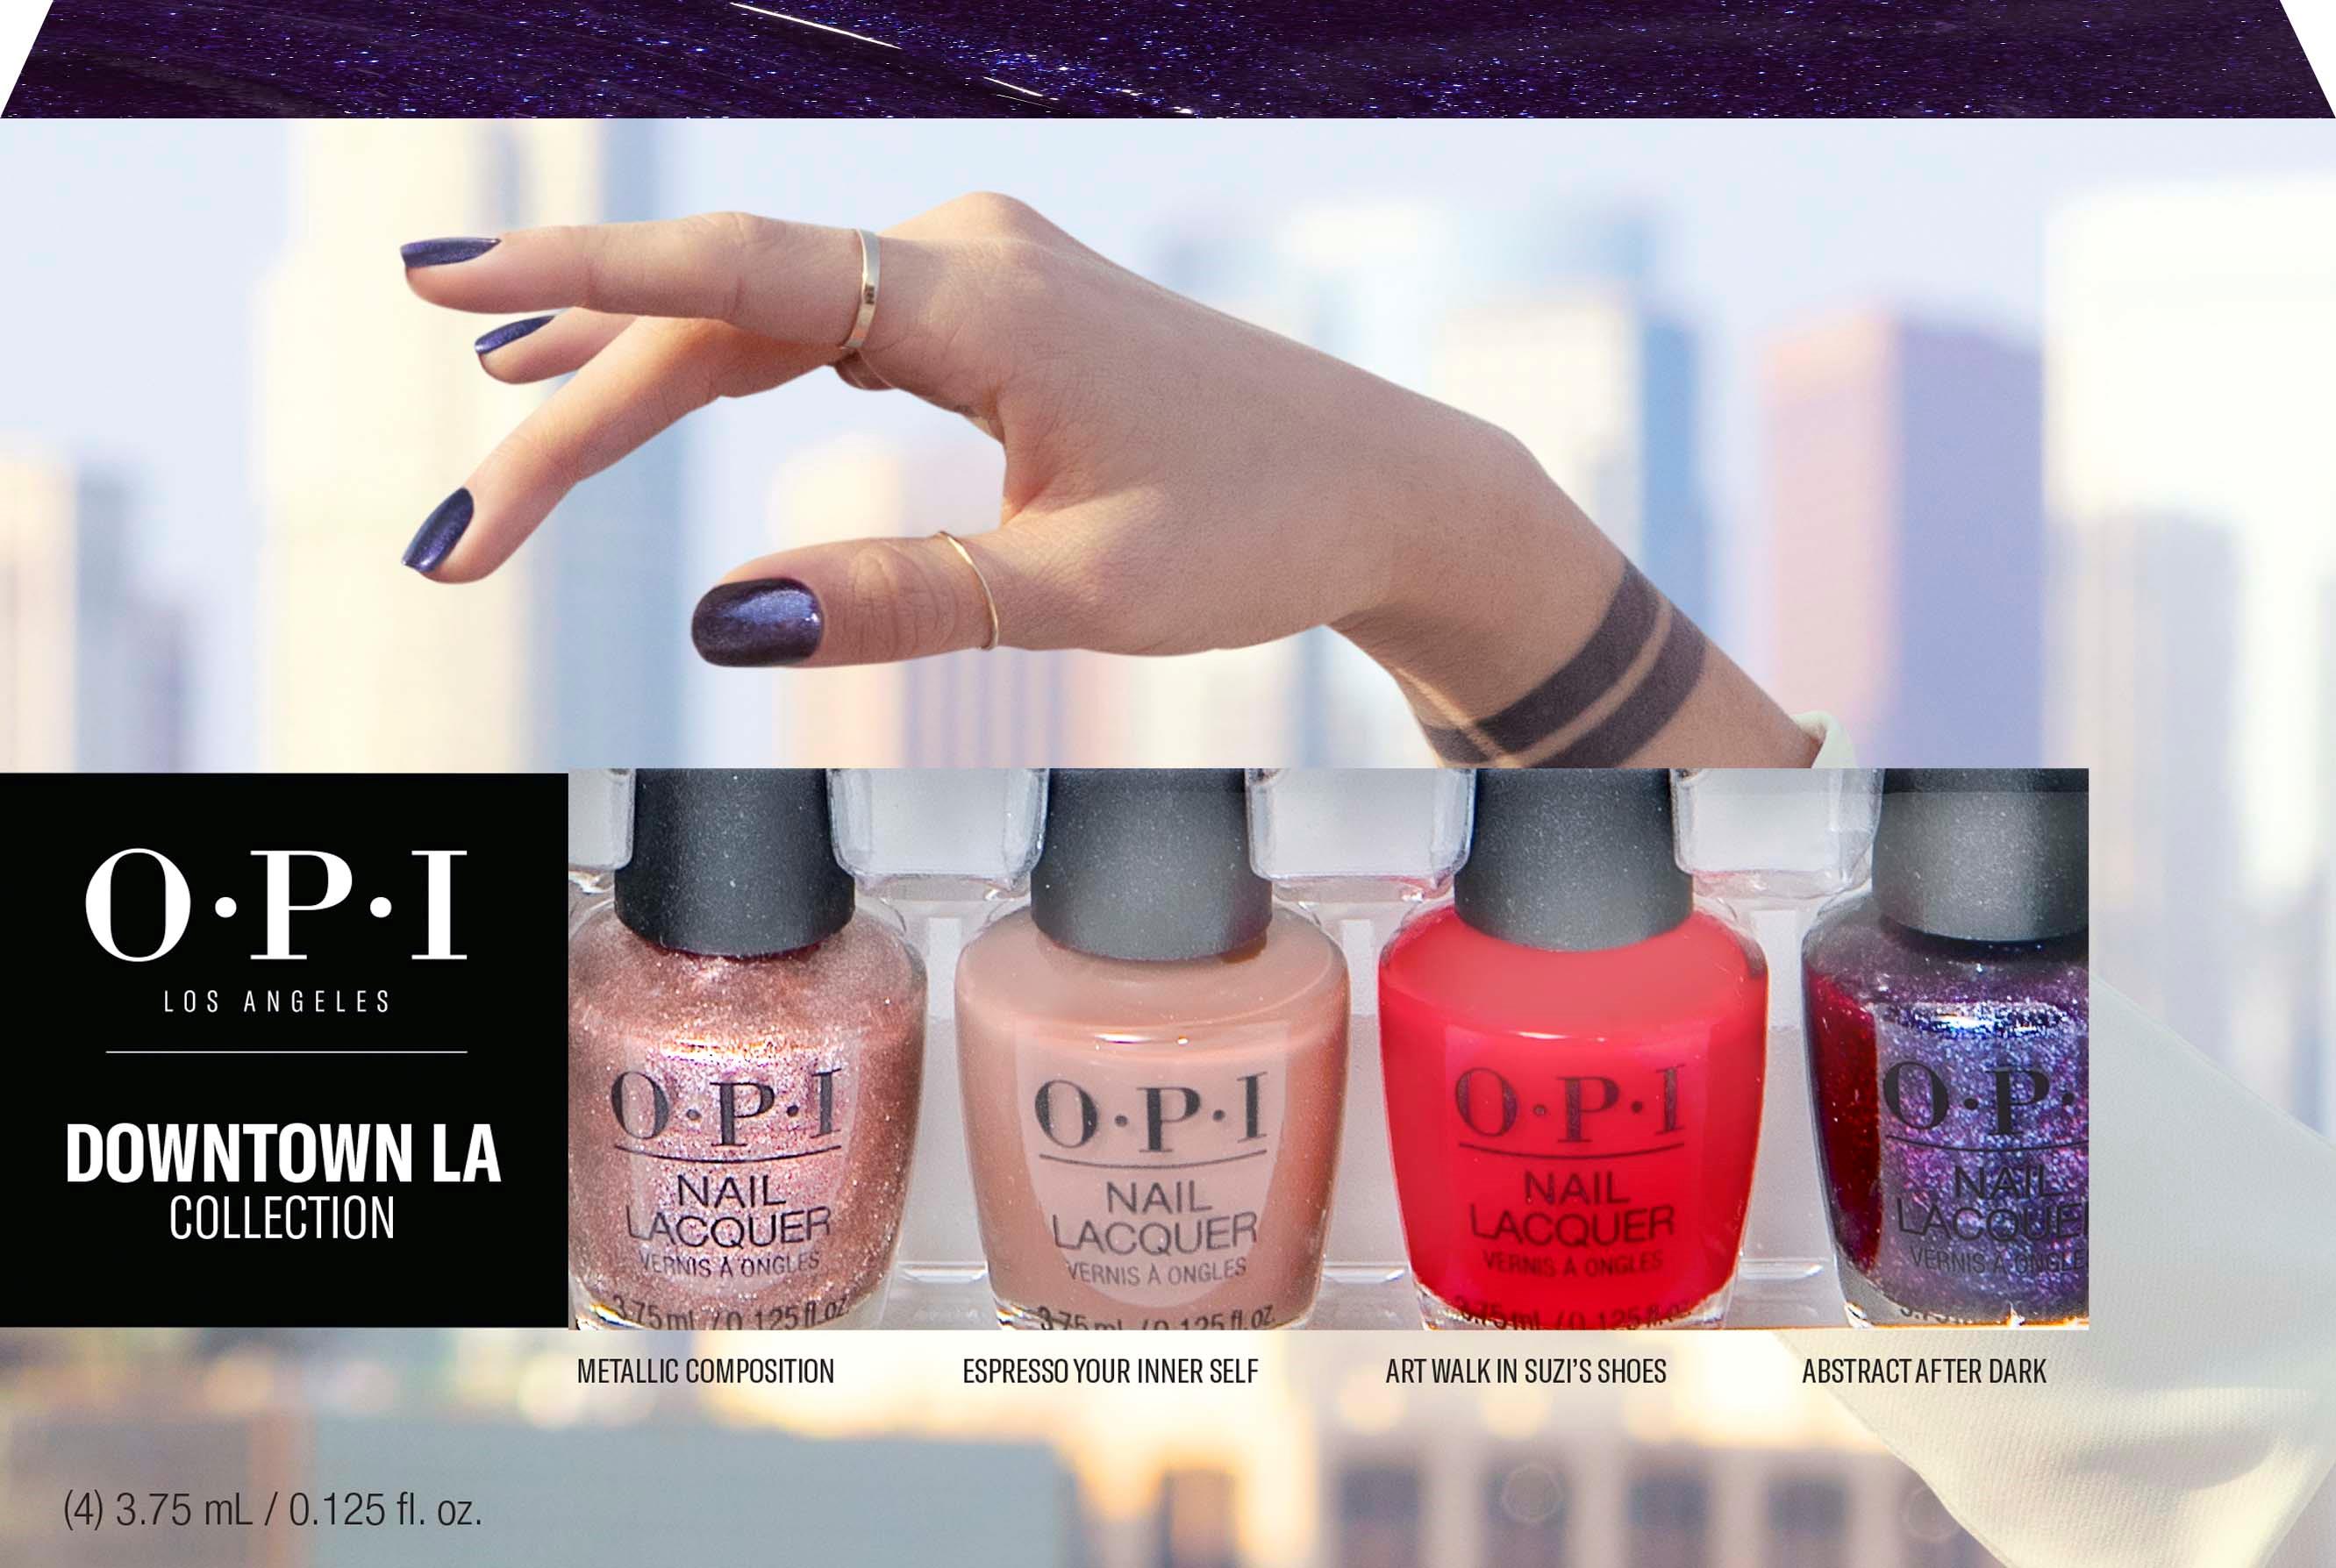 1. OPI Nail Lacquer, Tri-Cure Technology, 3-in-1 Nail Polish - wide 8